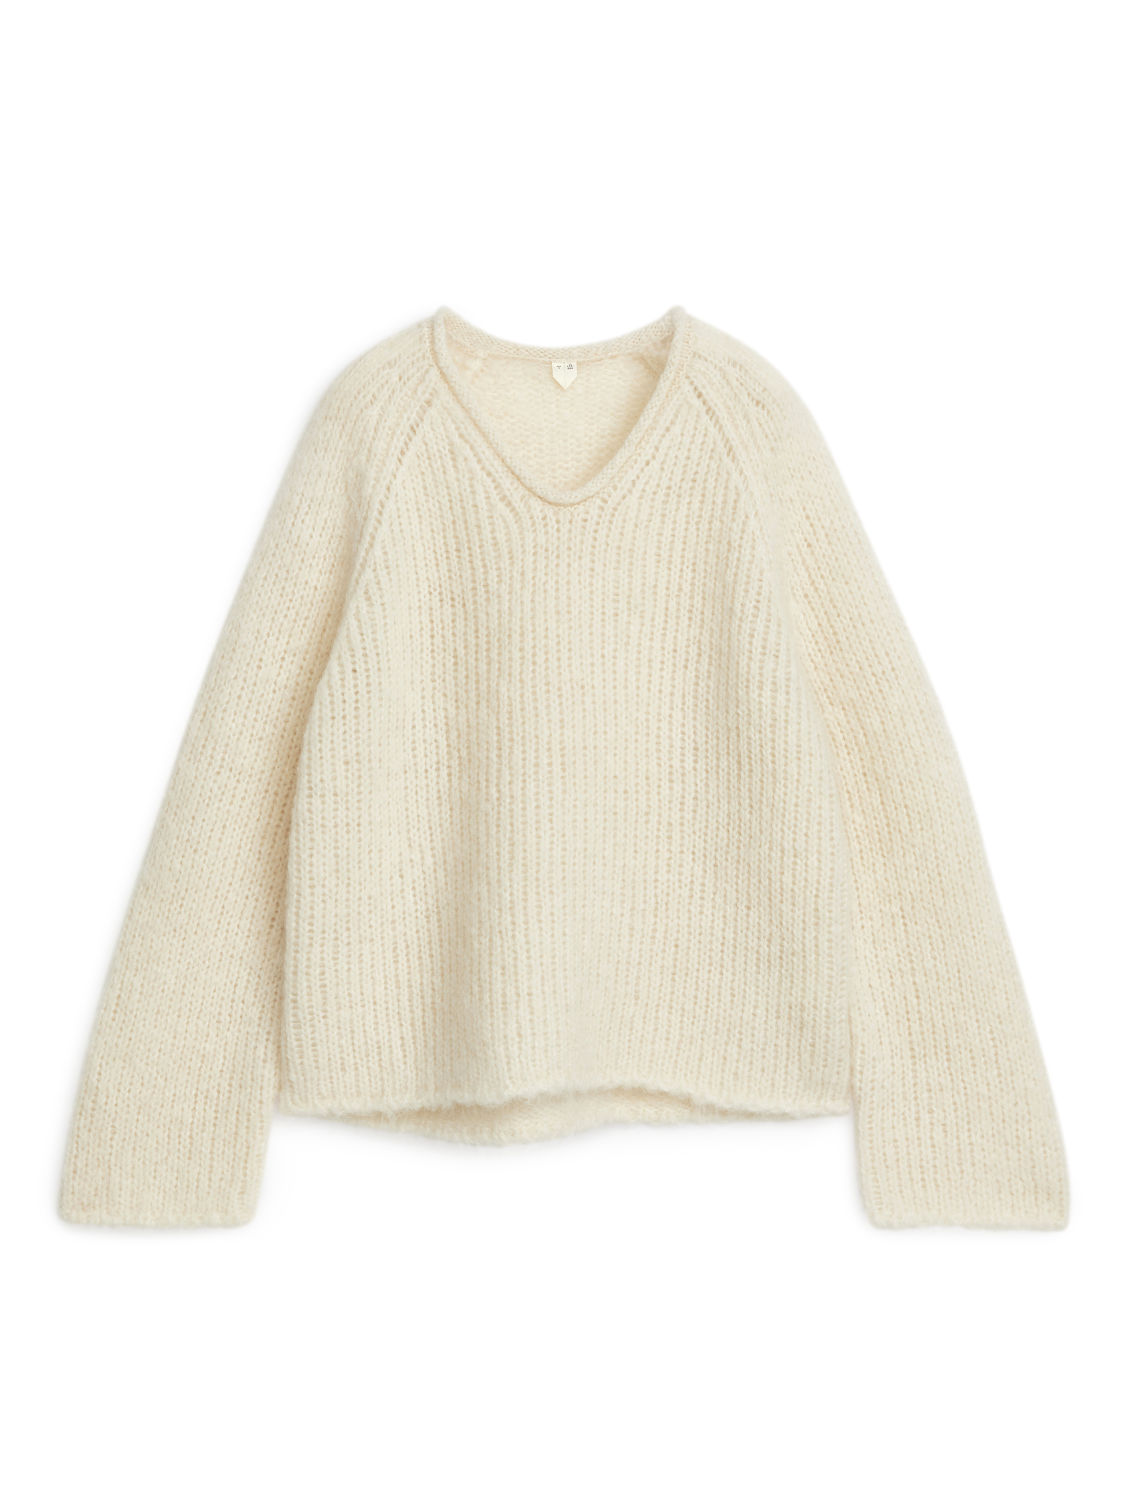 The Arket Cable-Knit Jumper Is Finally Back in Stock | Who What Wear UK